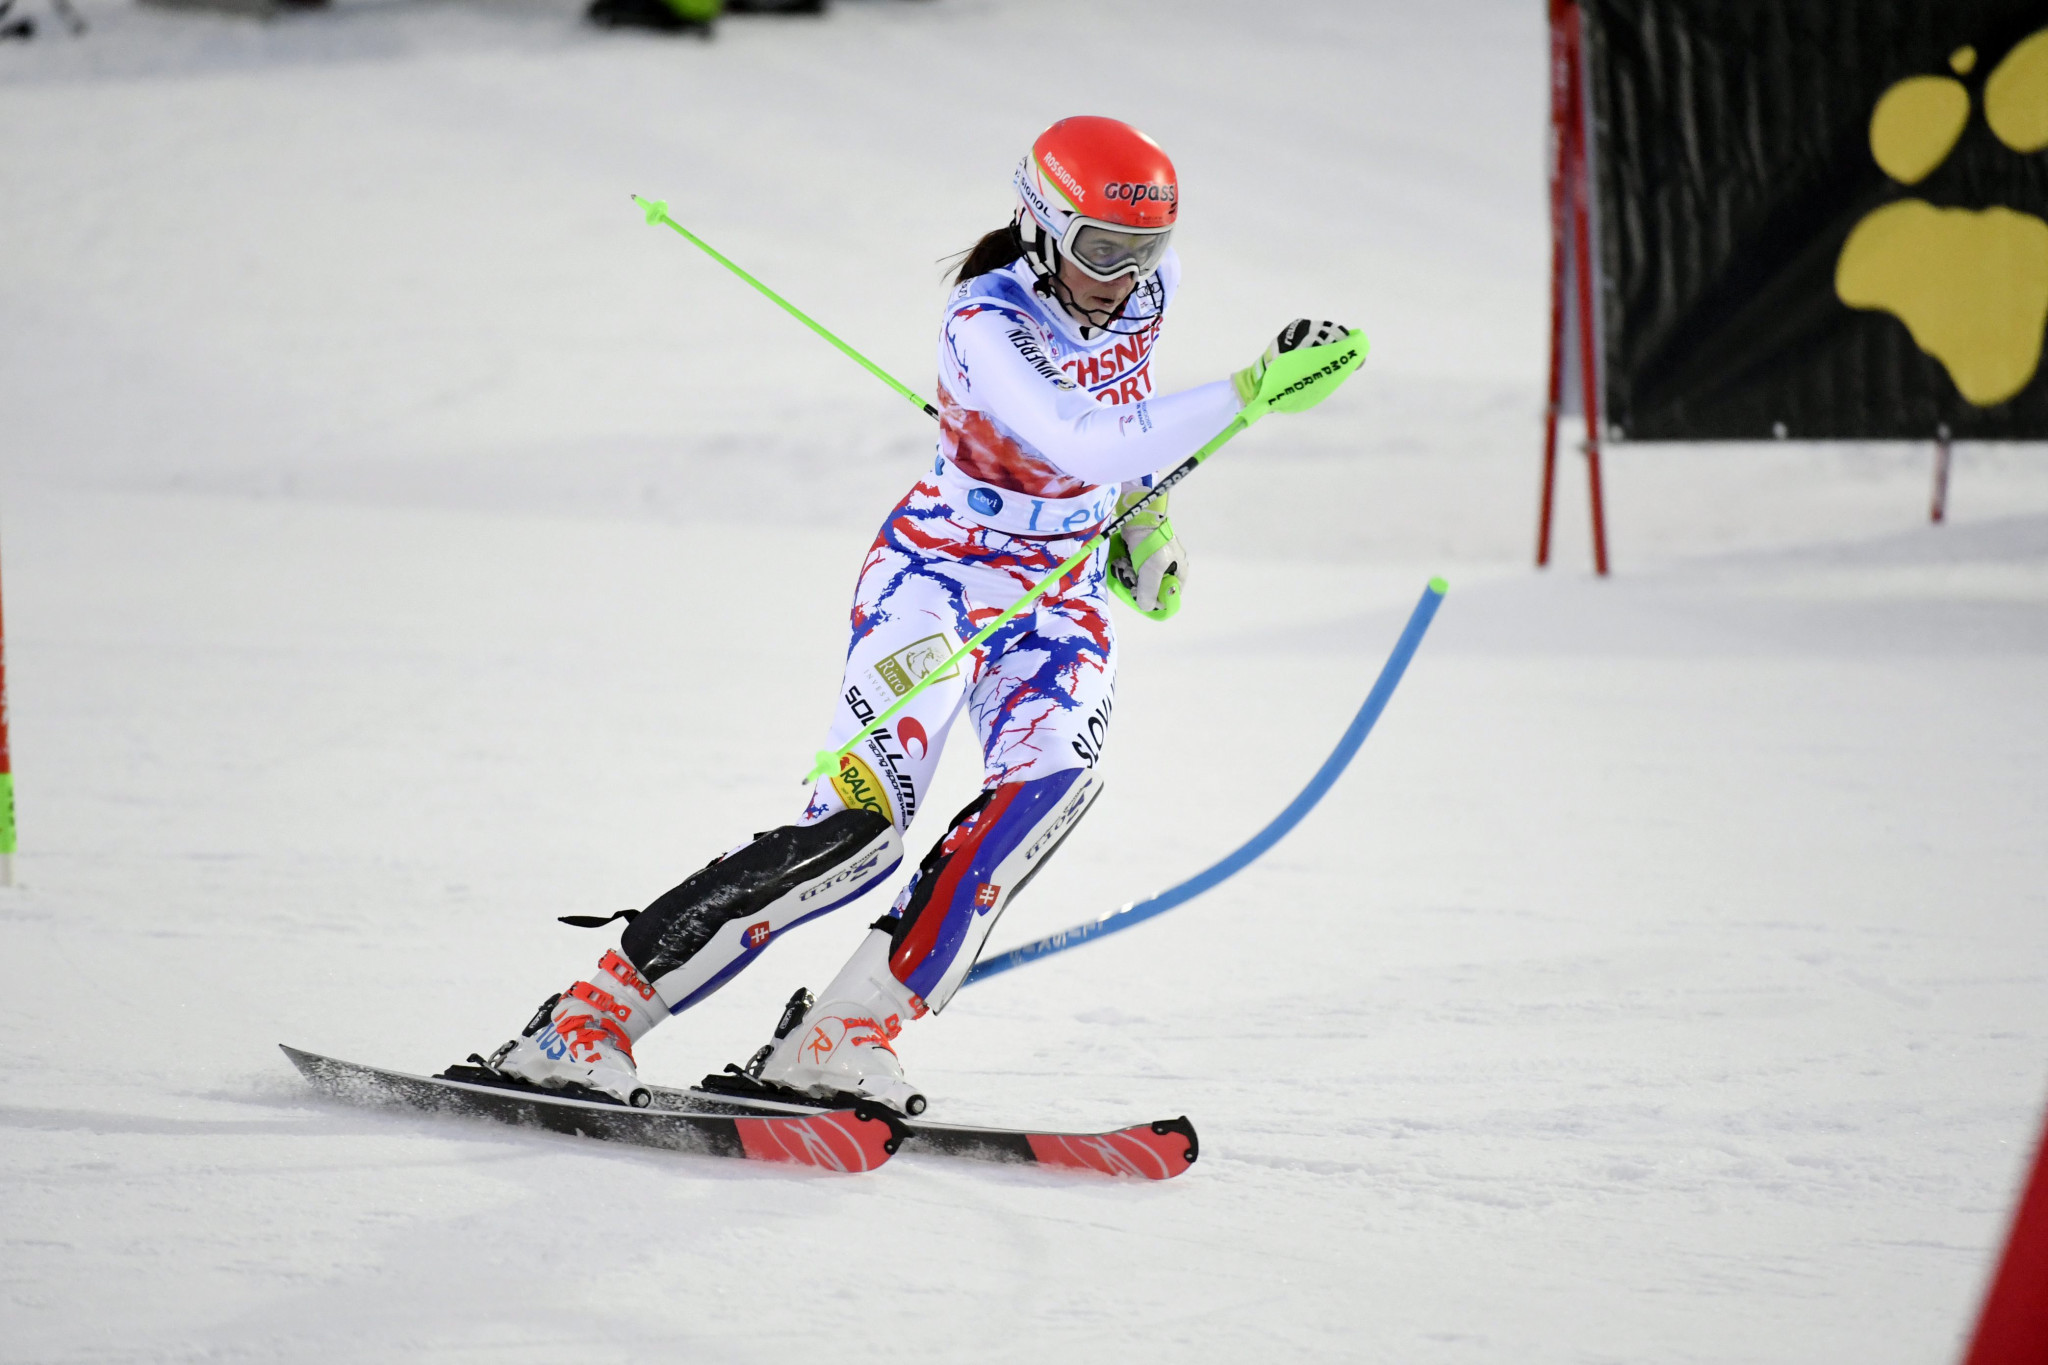 Vlhova gets the better of Shiffrin to claim slalom win at FIS World Cup in Levi